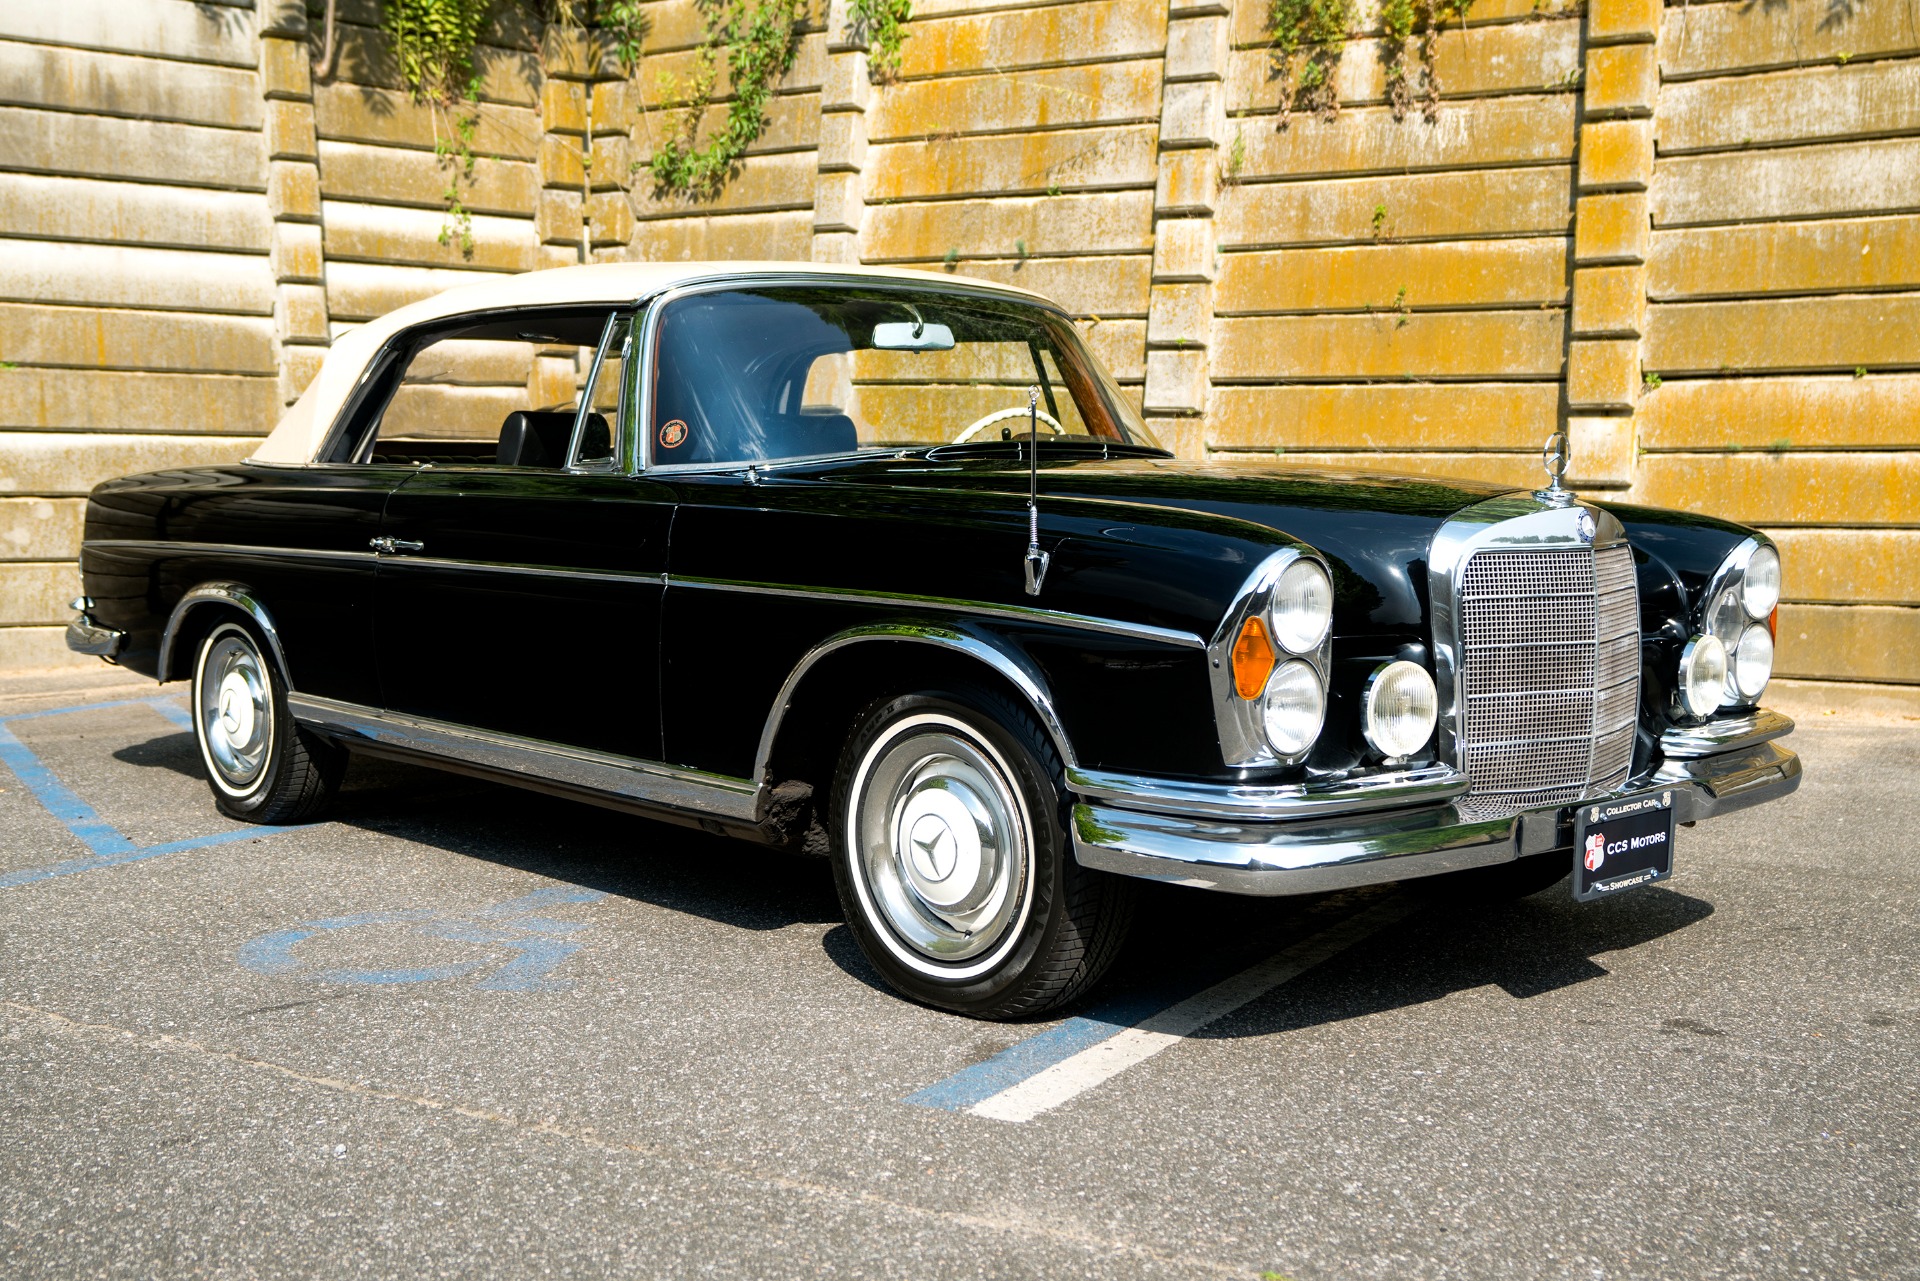 1966 Mercedes-Benz 250SE CONVERTIBLE Stock # 1340 for sale near Oyster